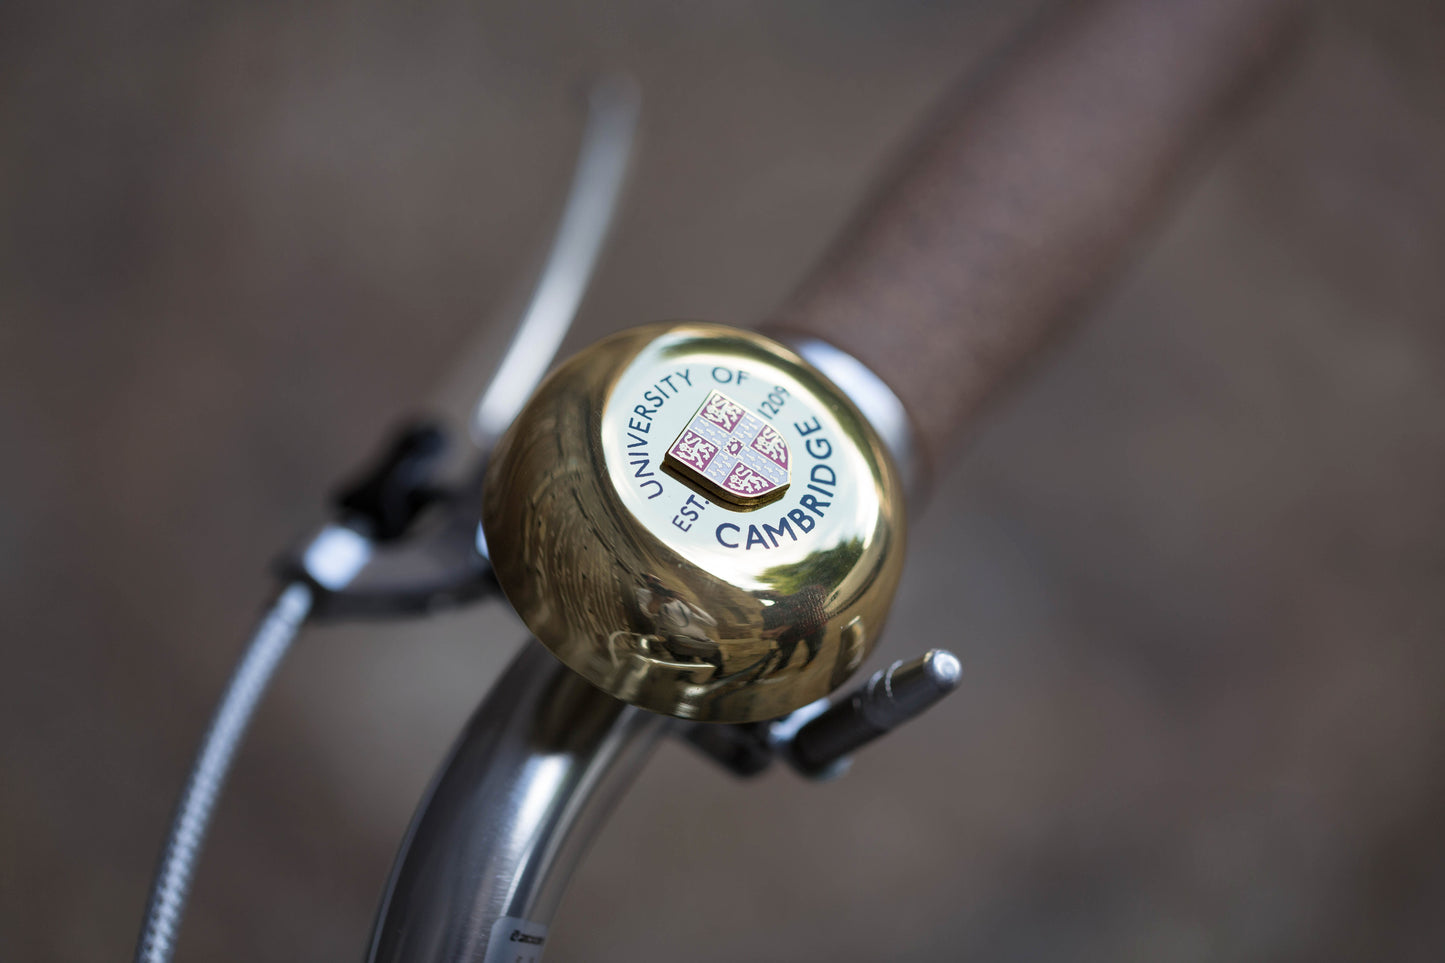 Brass Bell – Brilliant Bicycle Co.